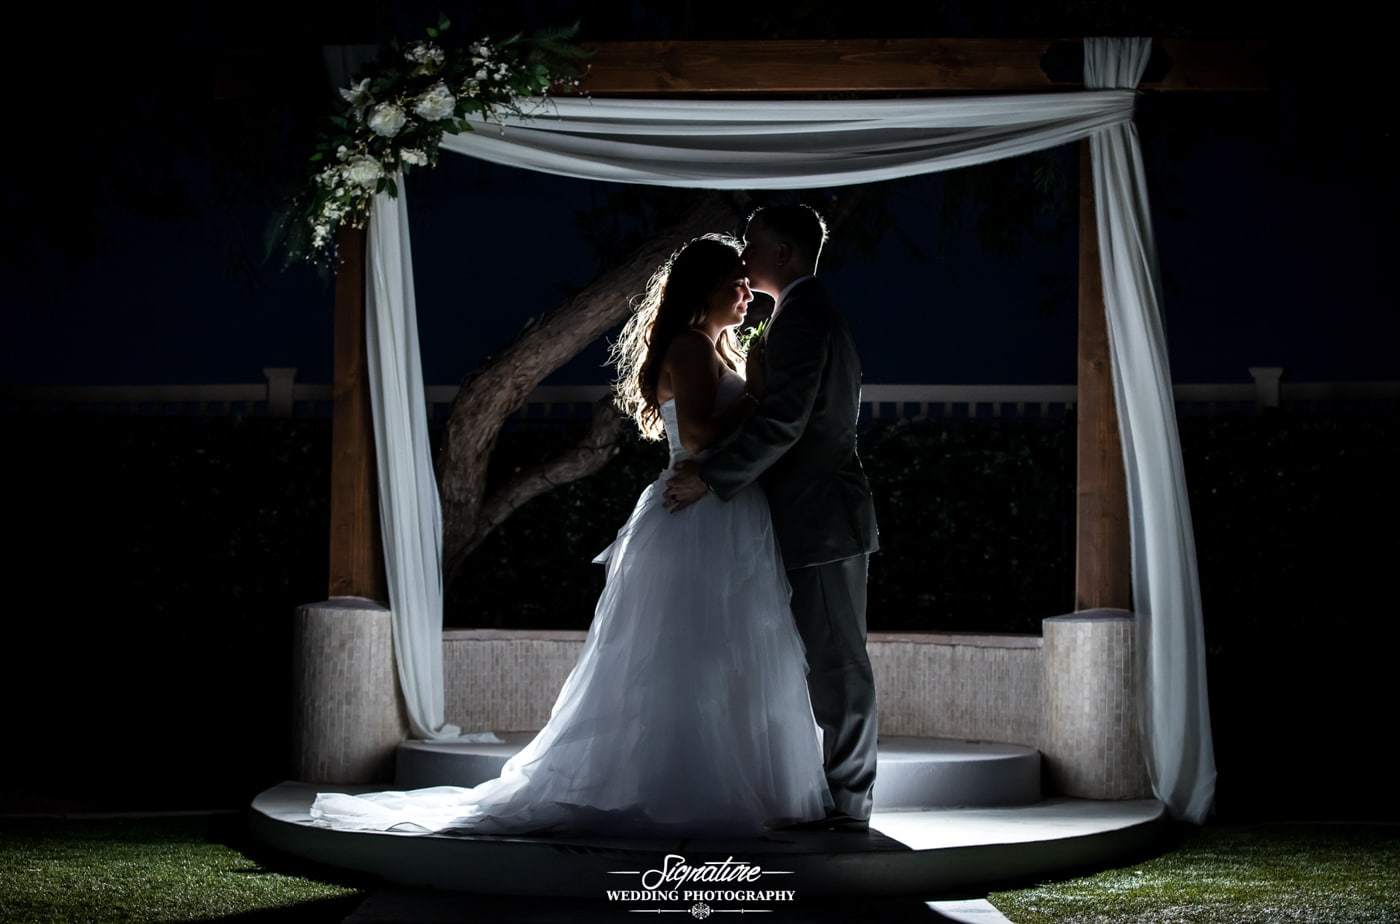 Groom kissing bride's forehead under archway silhouette